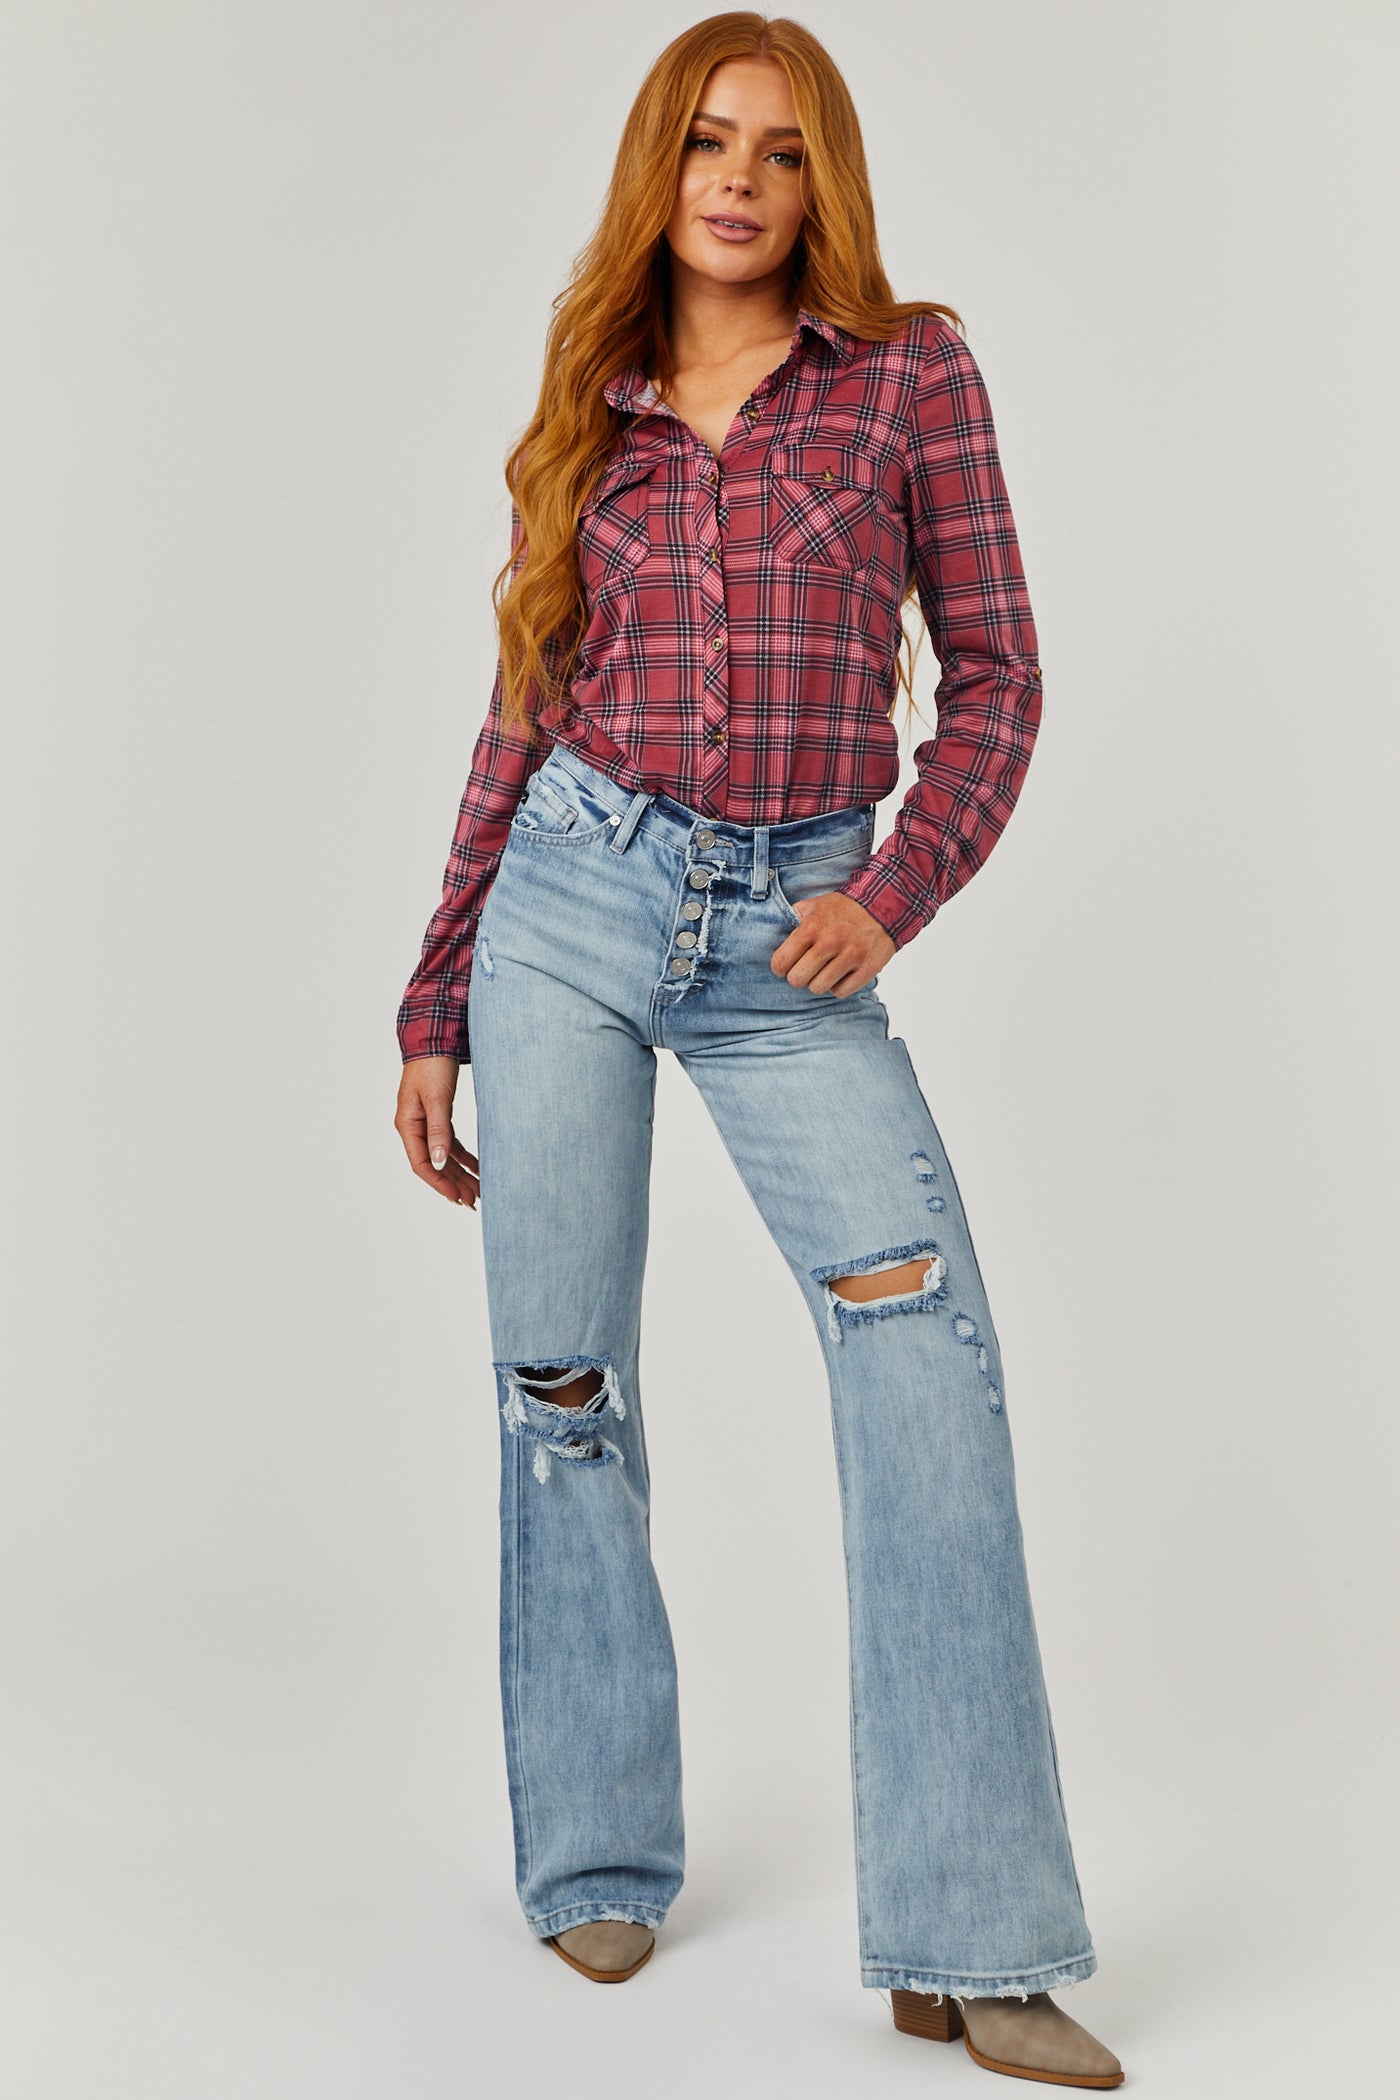 Hibiscus and Black Plaid Top with Chest Pocket